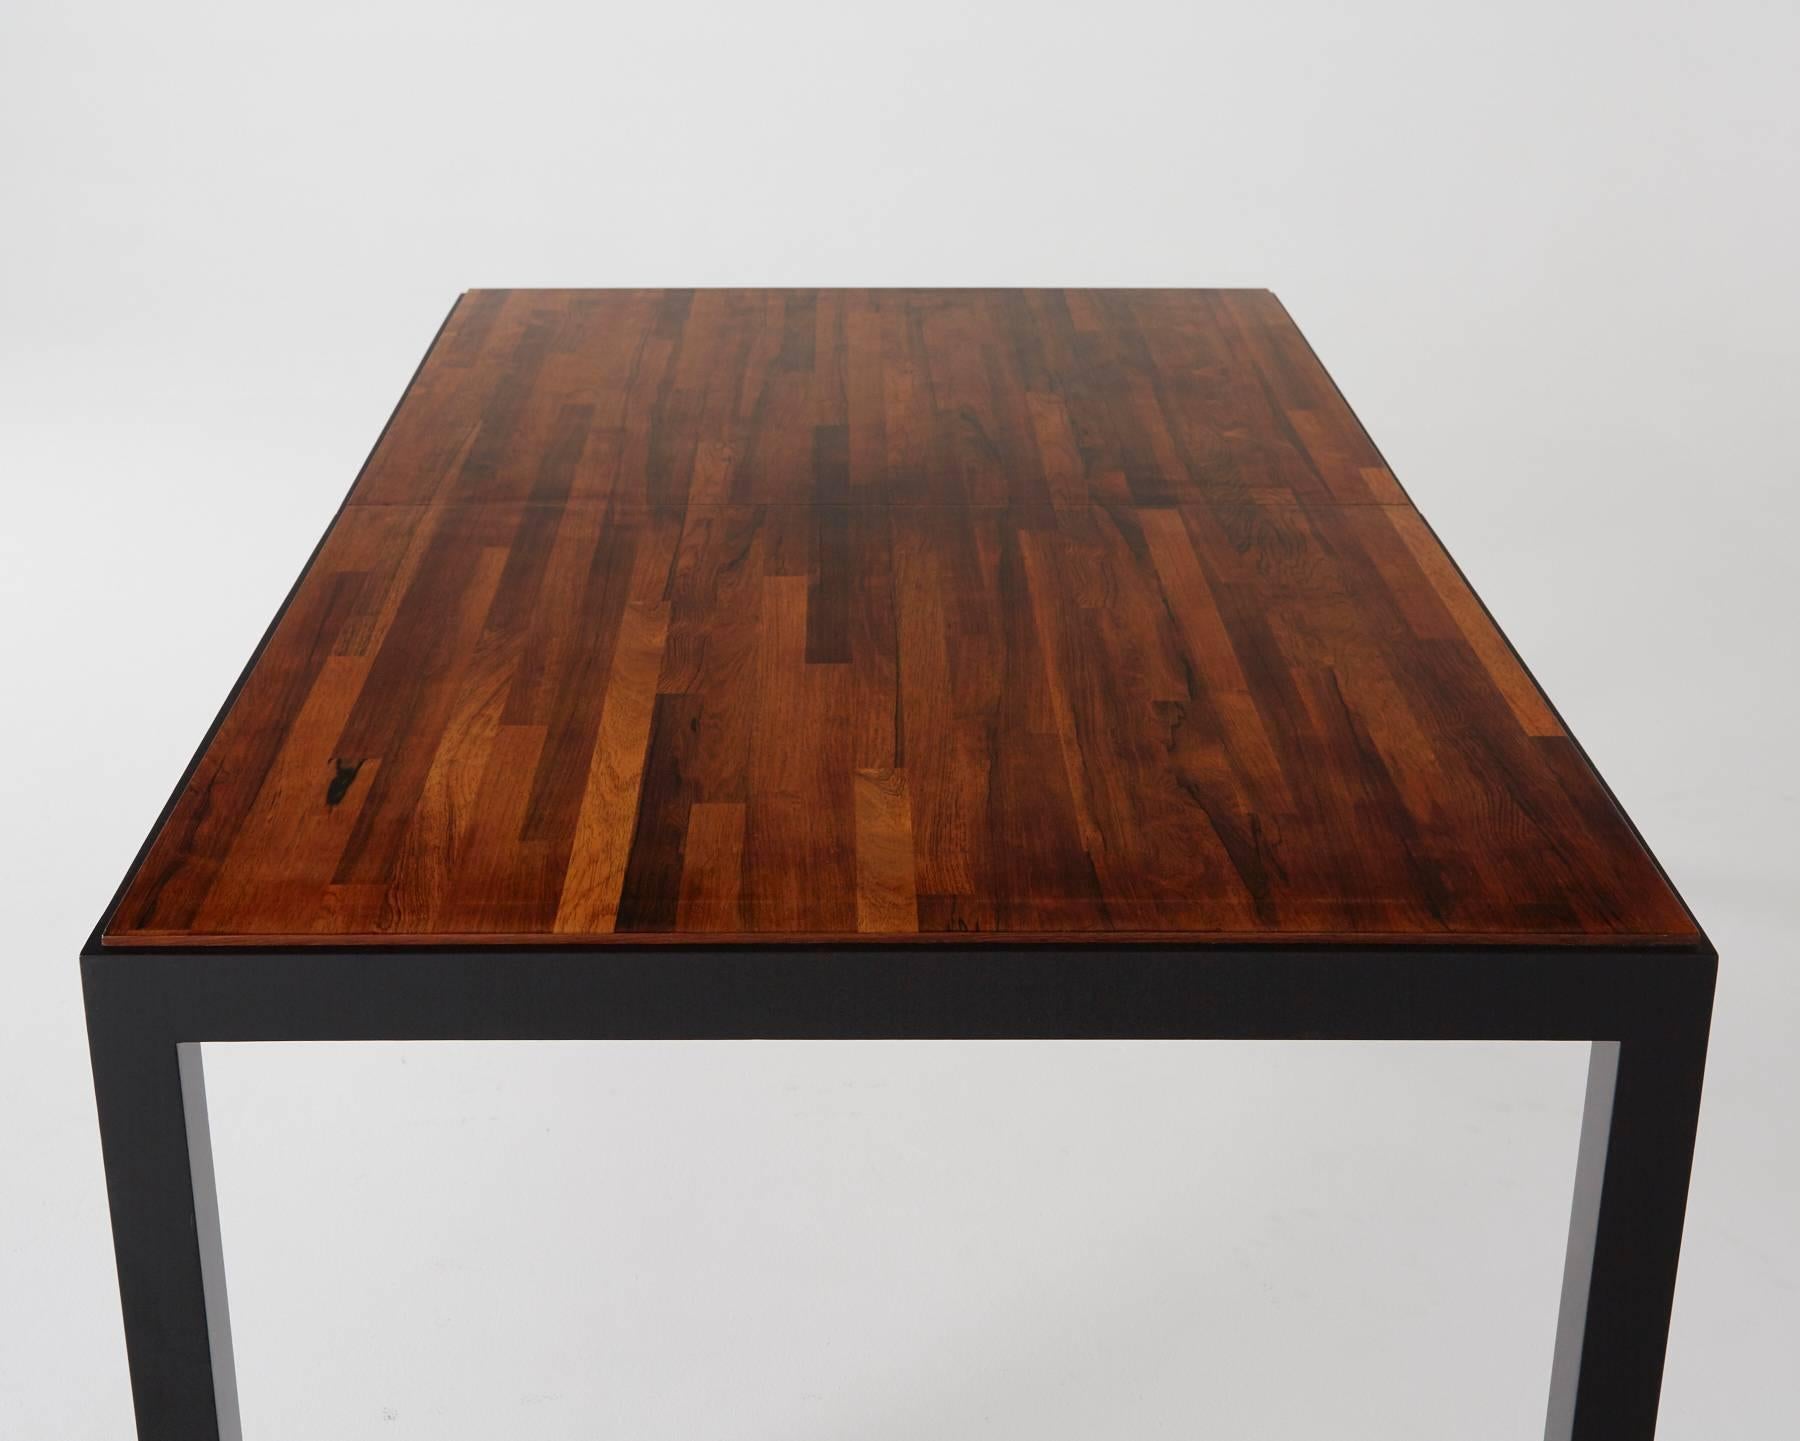 This beautifully restored dining table from Milo Baughman for Directional features strips of highly grained woods in various finishes creating contrasting lines for a spectacular effect. 

In excellent restored condition, the table is missing its